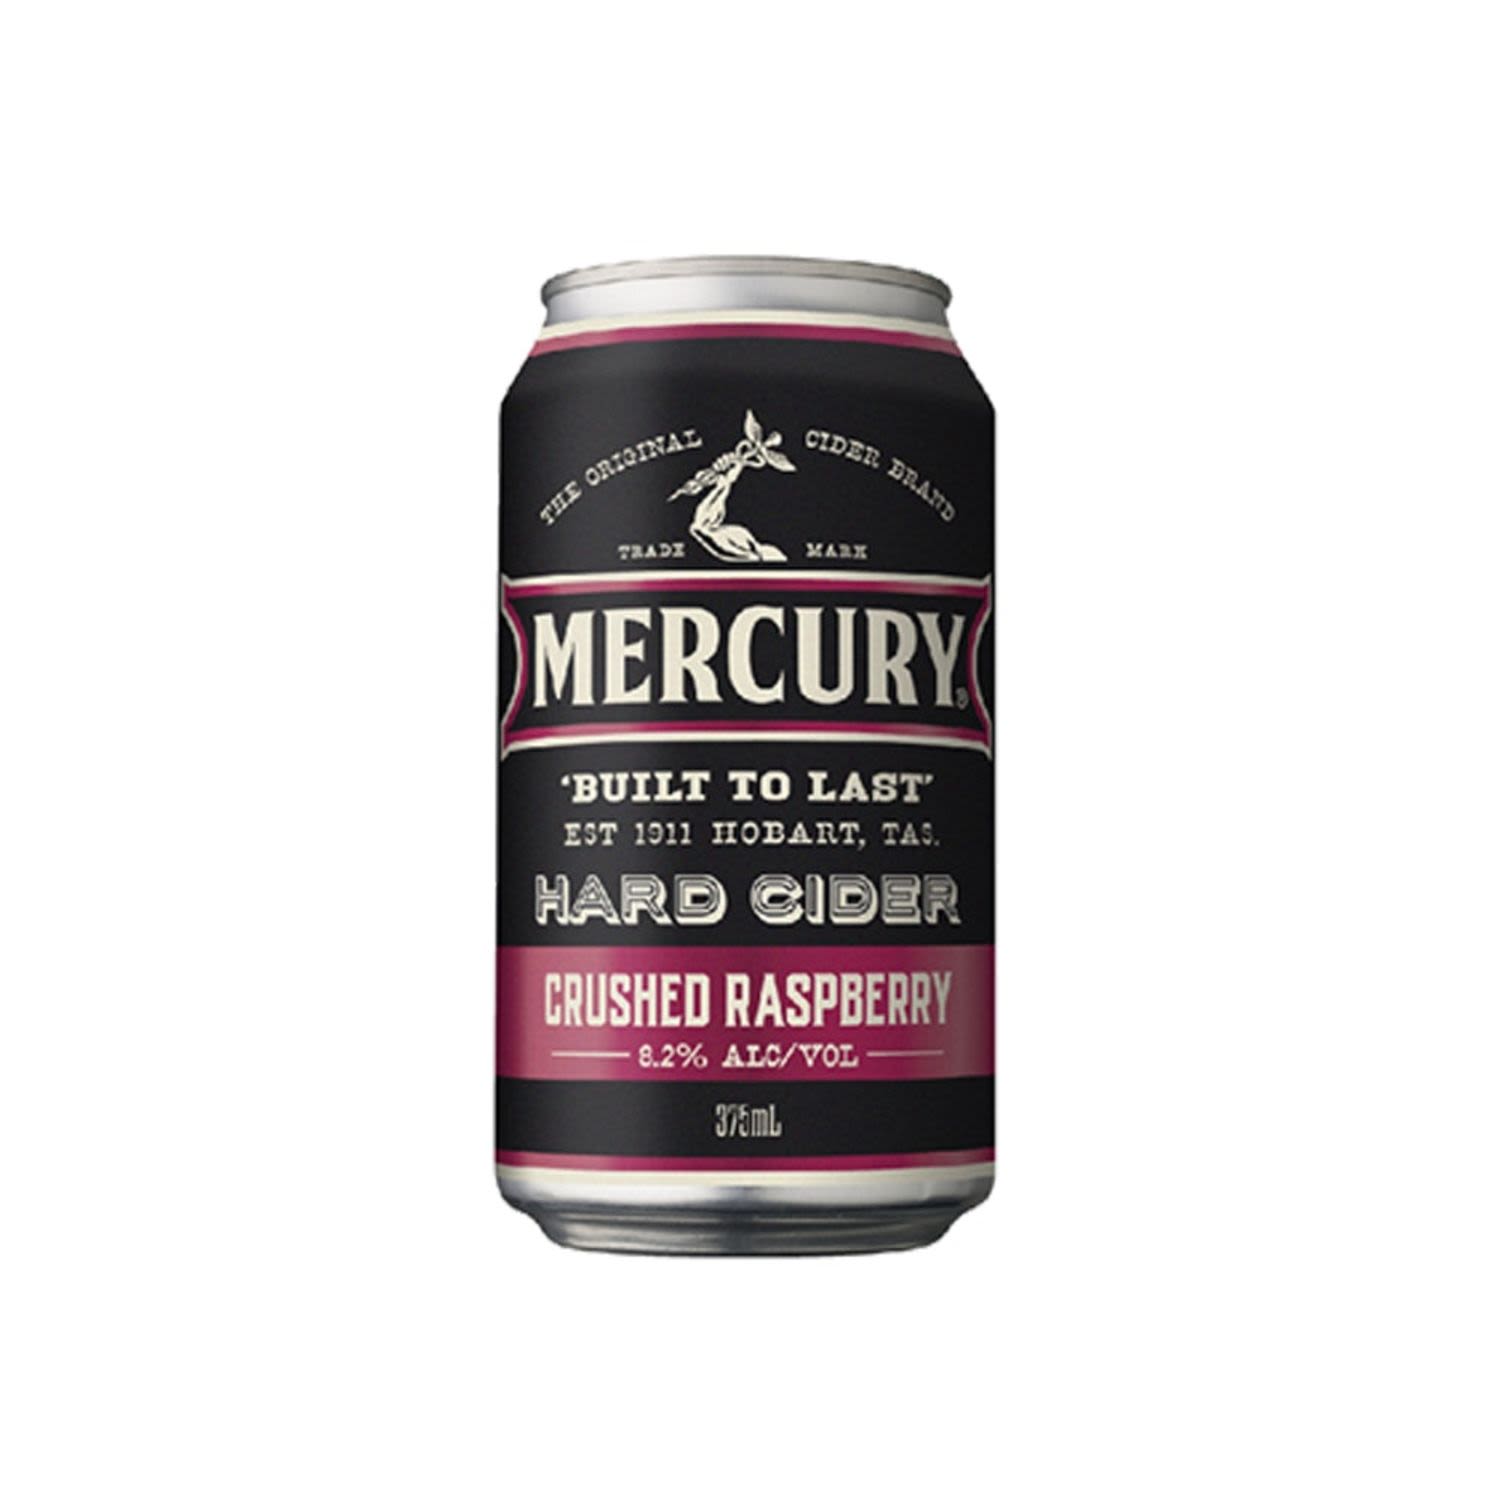 Mercury Hard Cider Crushed Raspberry 375mL Cans<br /> <br />Alcohol Volume: 8.20%<br /><br />Pack Format: Can<br /><br />Standard Drinks: 2.4</br /><br />Pack Type: Can<br /><br />Country of Origin: Australia<br />